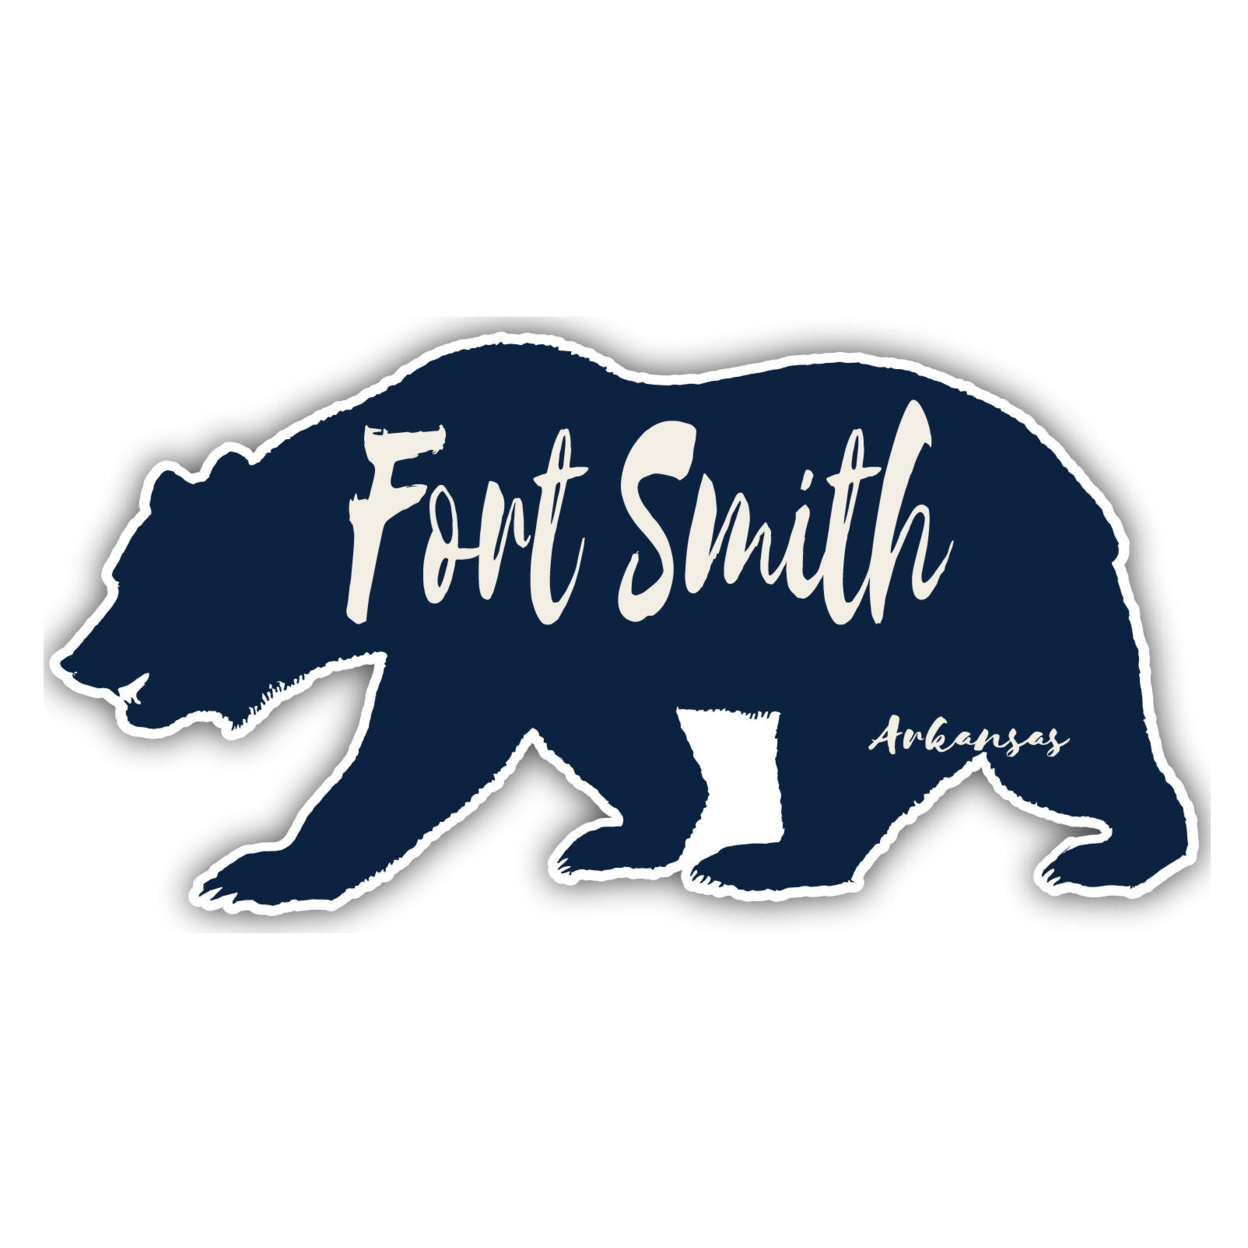 Fort Smith Arkansas Souvenir Decorative Stickers (Choose Theme And Size) - 4-Pack, 4-Inch, Bear